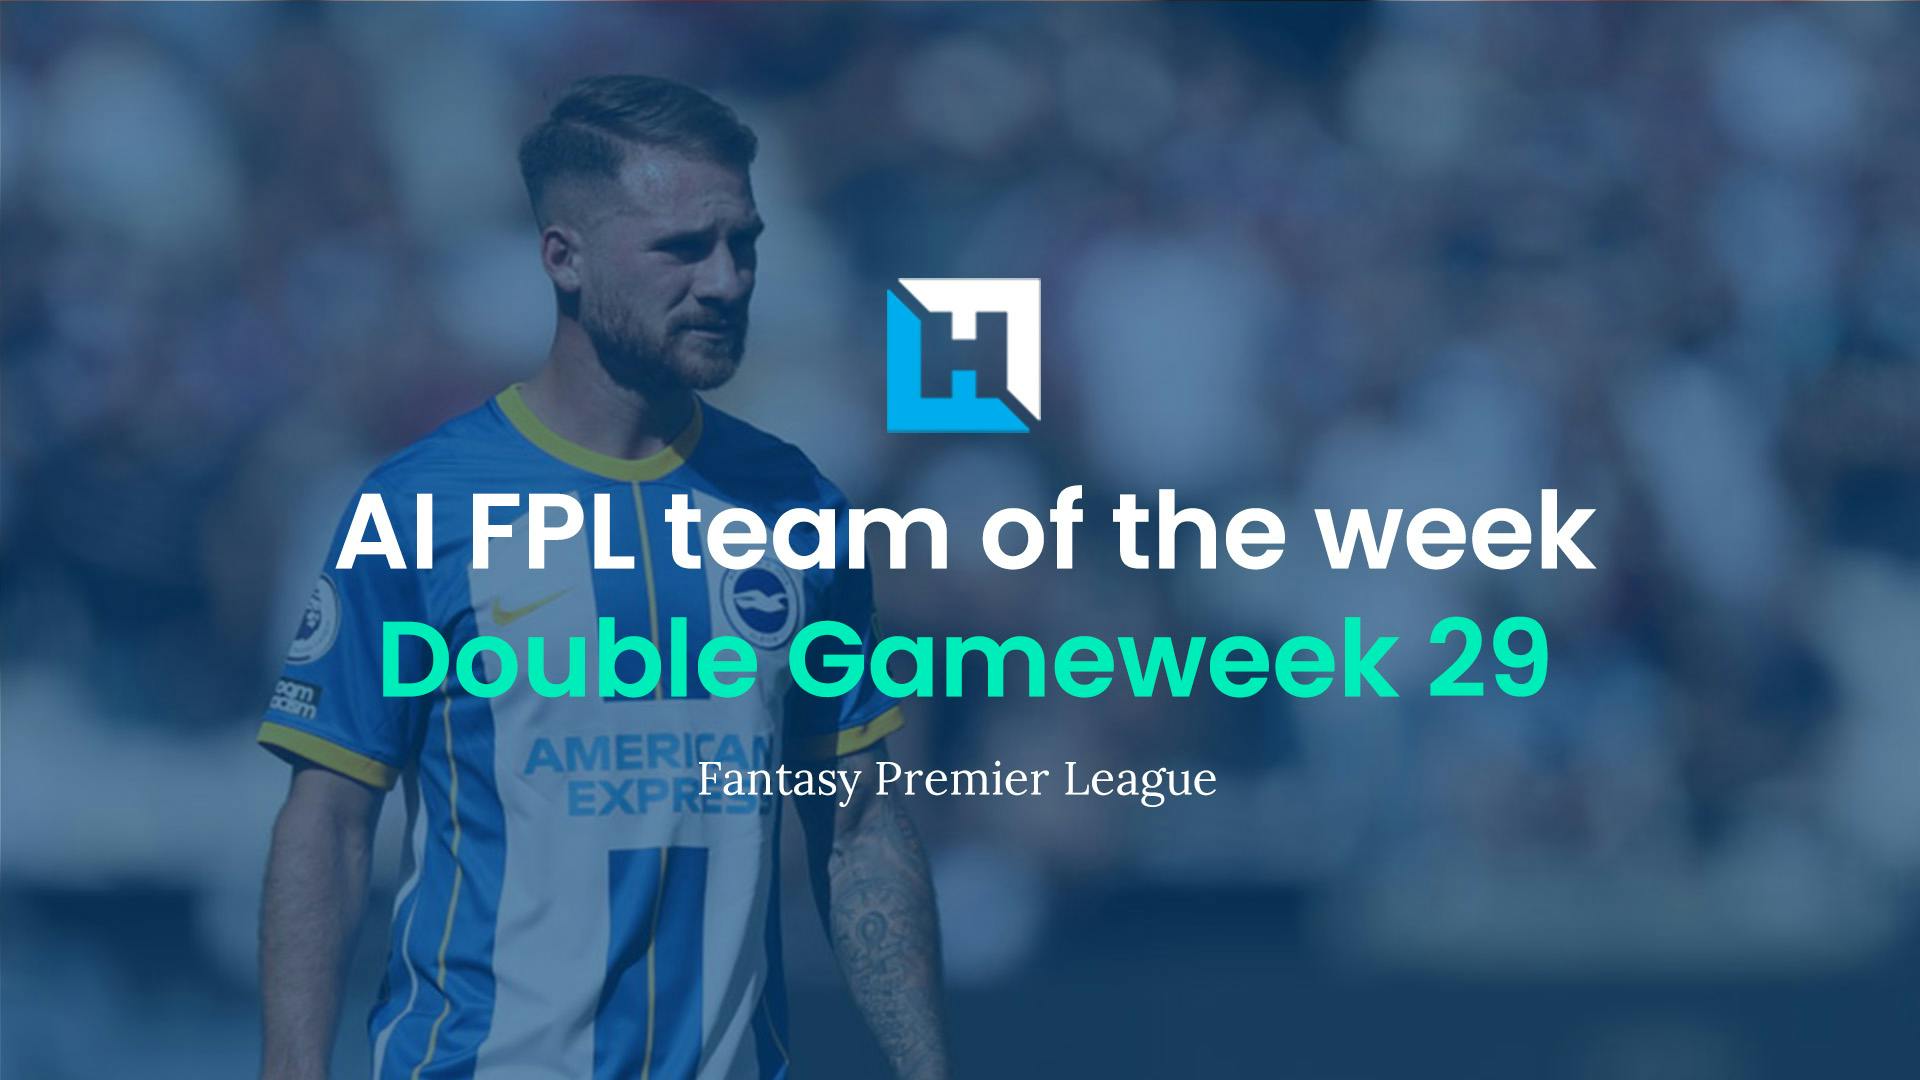 What is the best FPL team for Gameweek 29 based on predicted points?